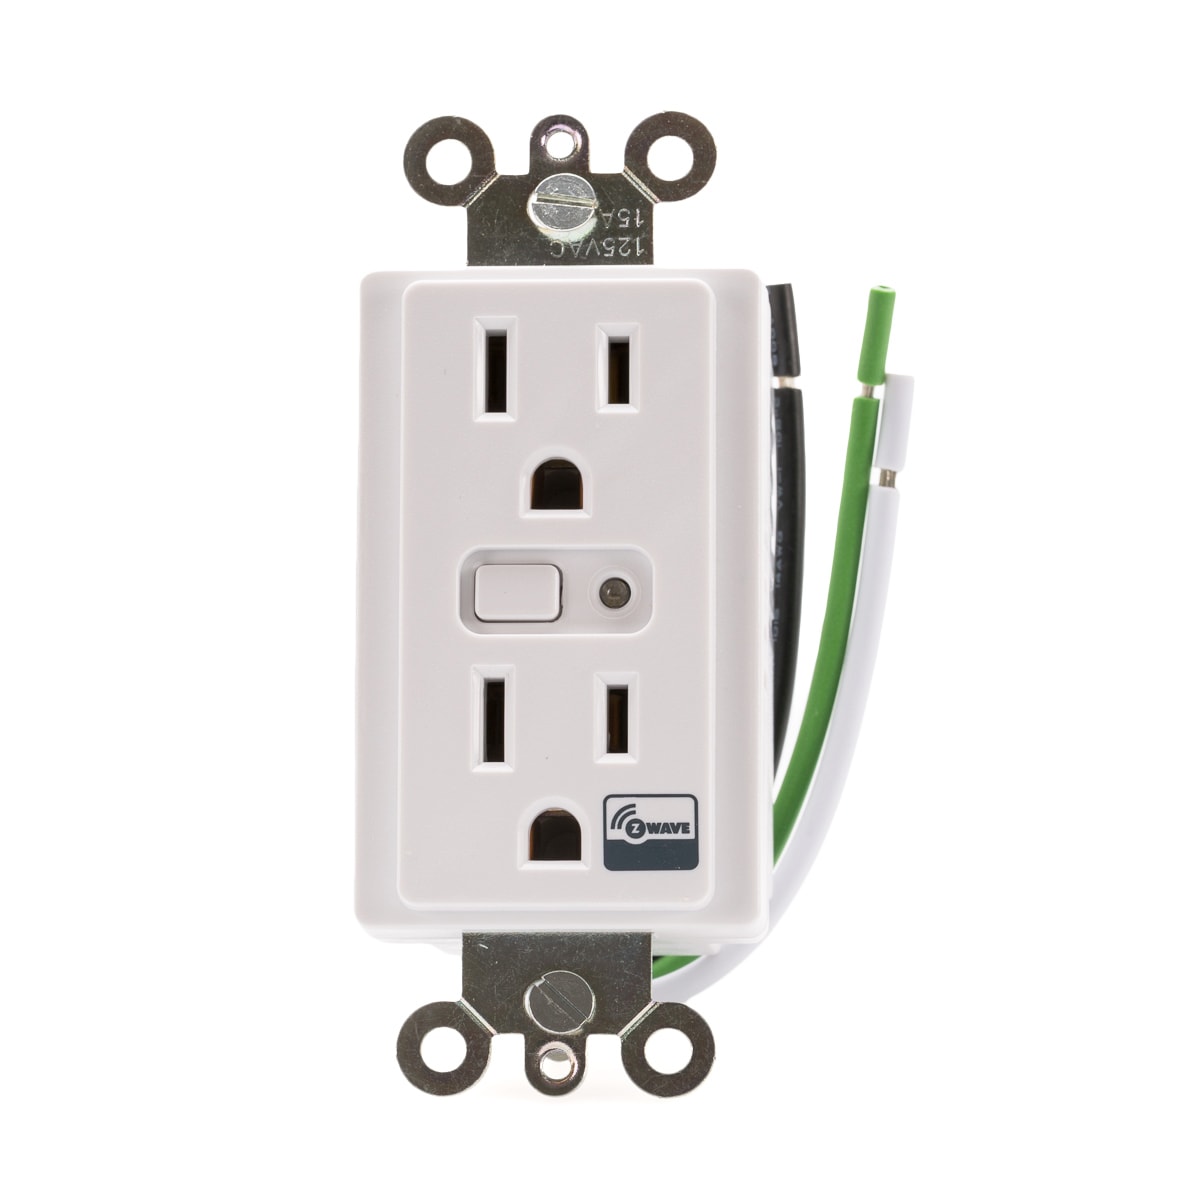 Basics Smart In-Wall Outlet with 2 Individually Controlled Outlets,  Tamper Resistant, 2.4 GHz Wi-Fi, Works with Alexa Only, 4.57 x 2.80 x 1.85